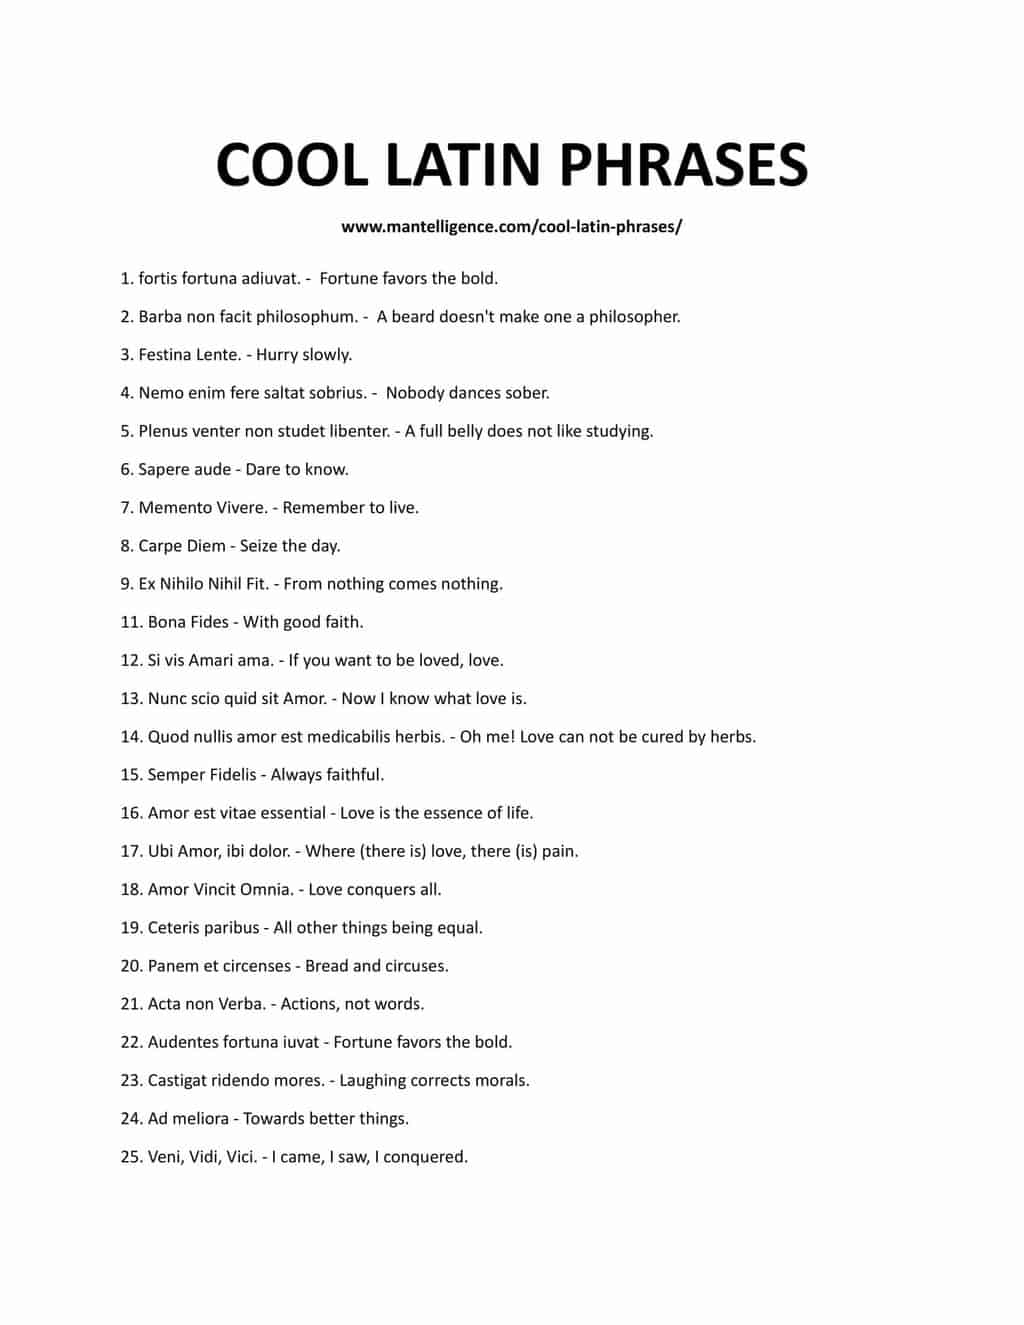 downloadable and printable list of phrases 